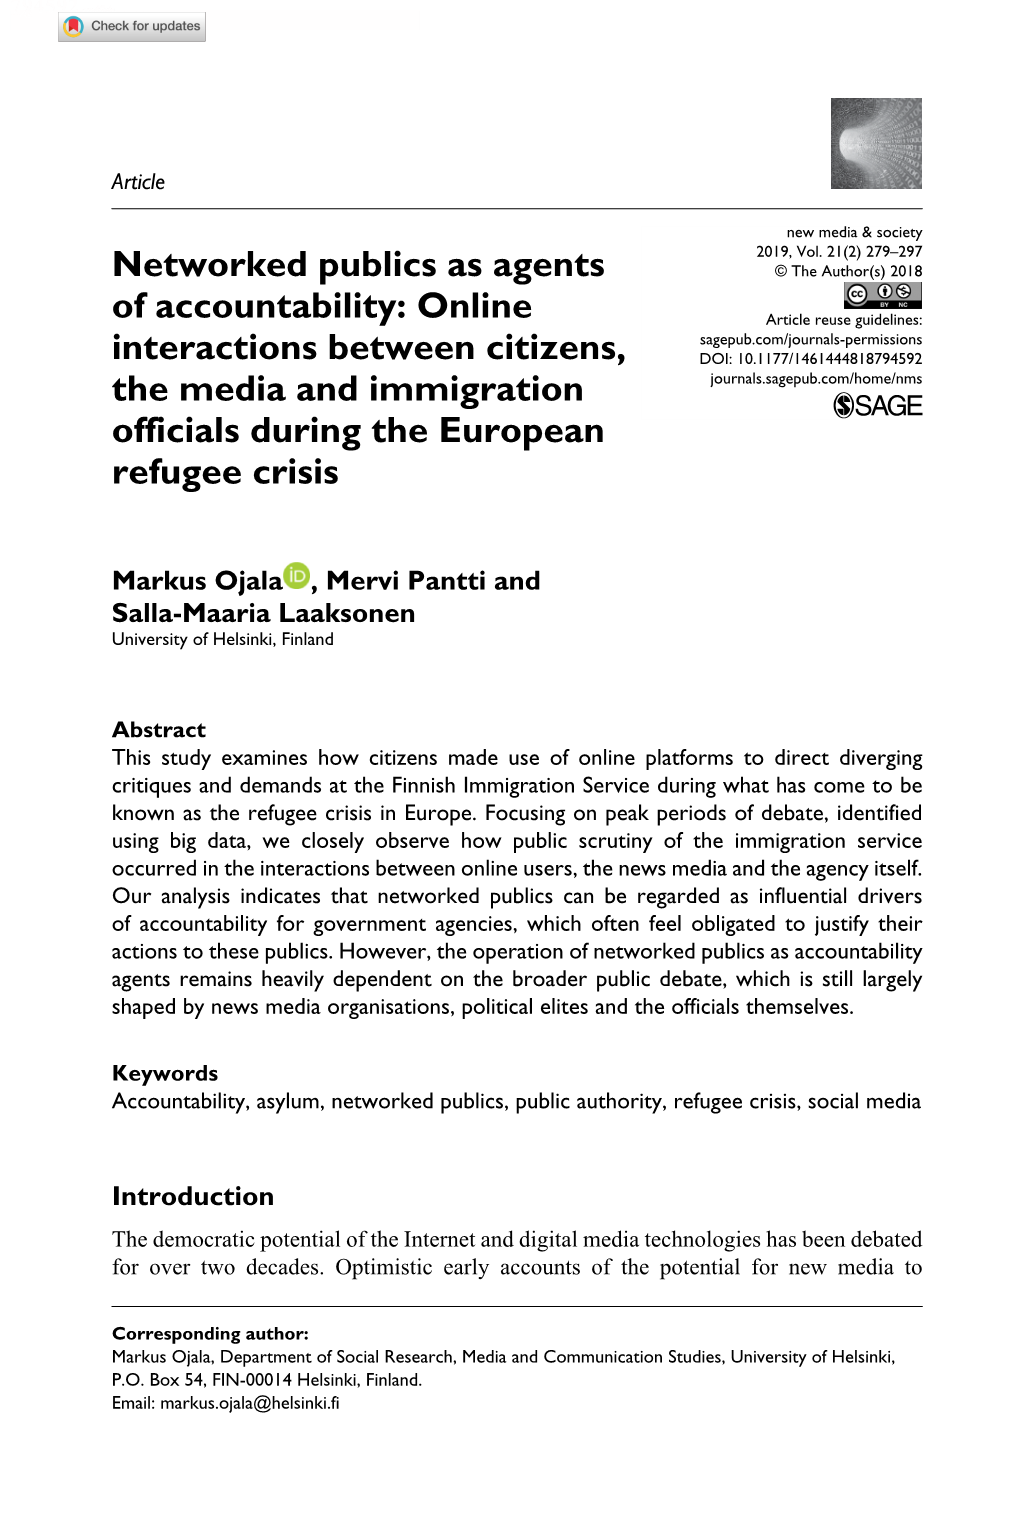 Networked Publics As Agents of Accountability: Online Interactions